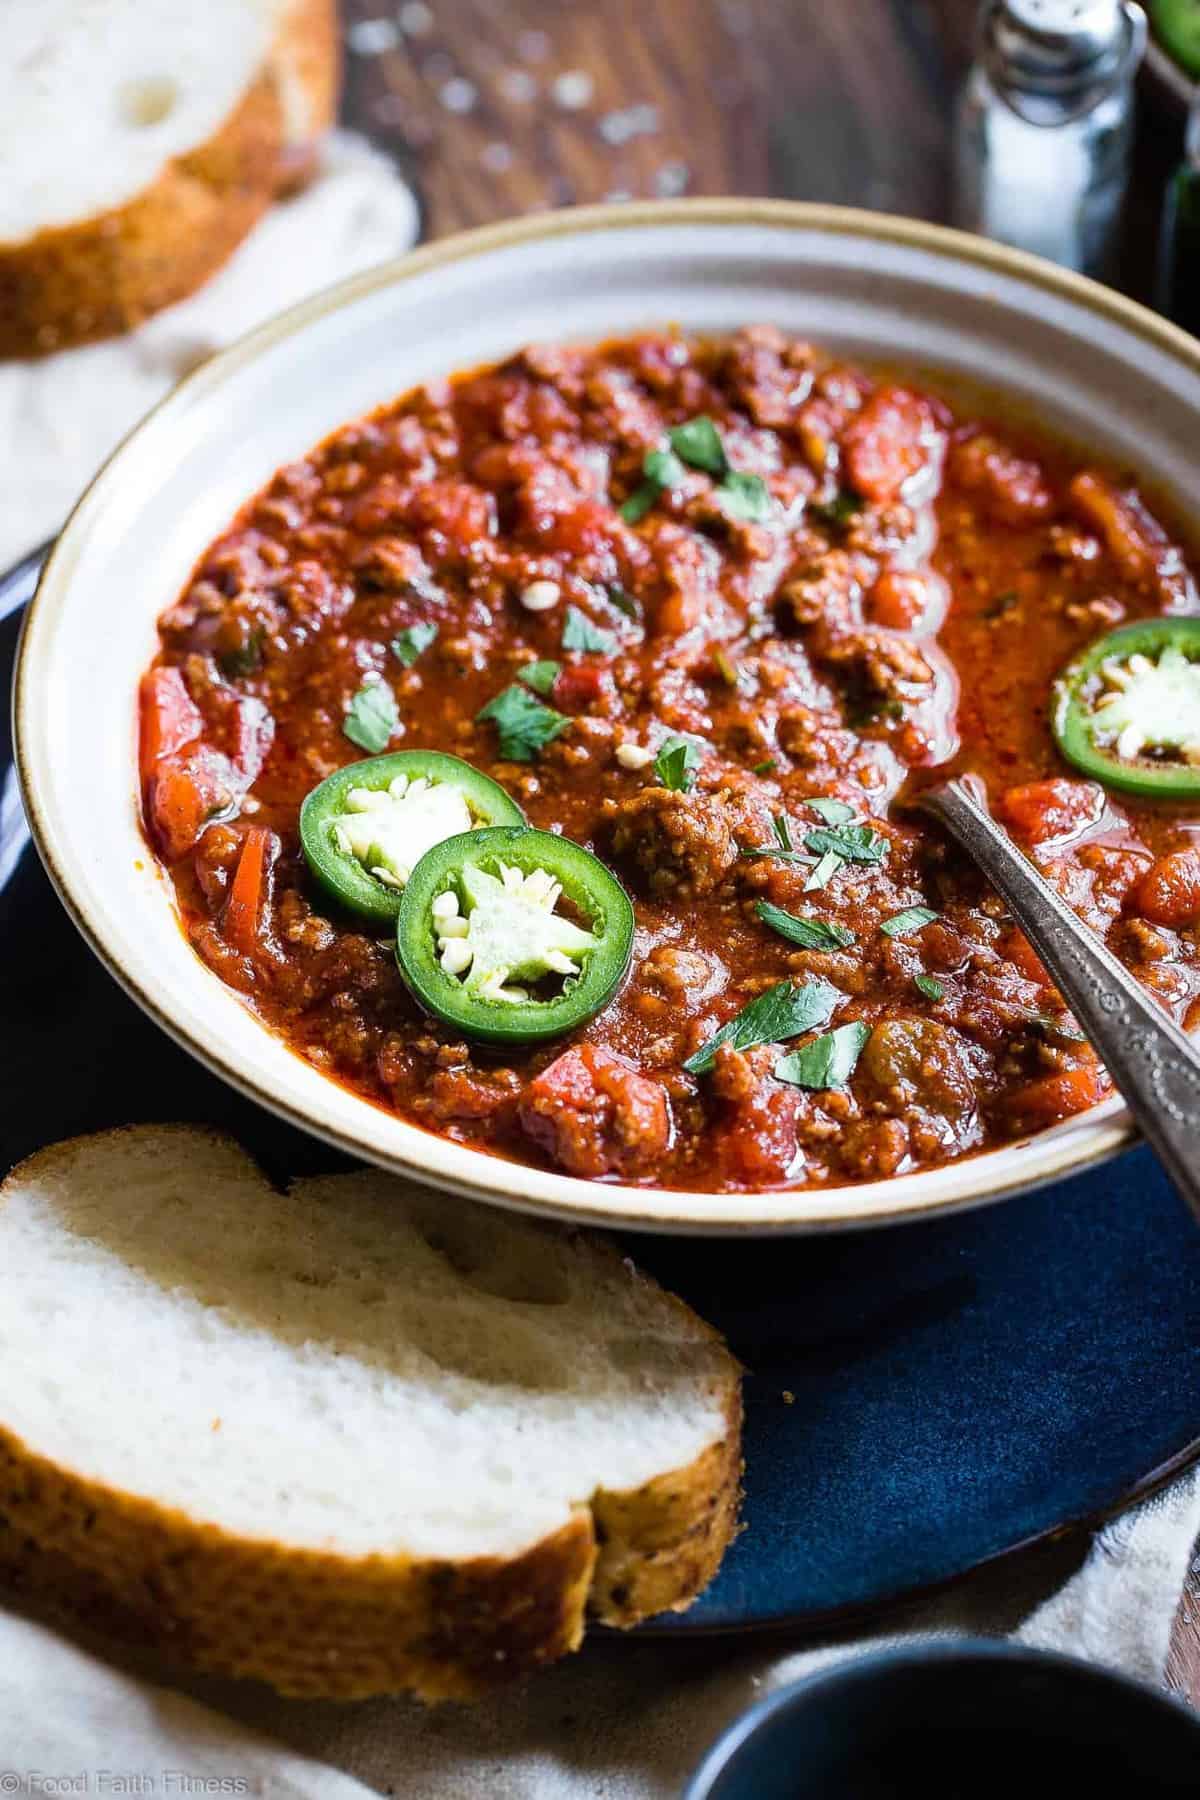 Instant Pot Whole30 Keto Chili - This whole30 chili recipe is a meat lovers dream! It's the easiest healthy weeknight dinner that the whole family will love and it freezes great for leftovers or meal prep! | #Foodfaithfitness | #Keto #Lowcarb #Paleo #Whole3o #InstantPot